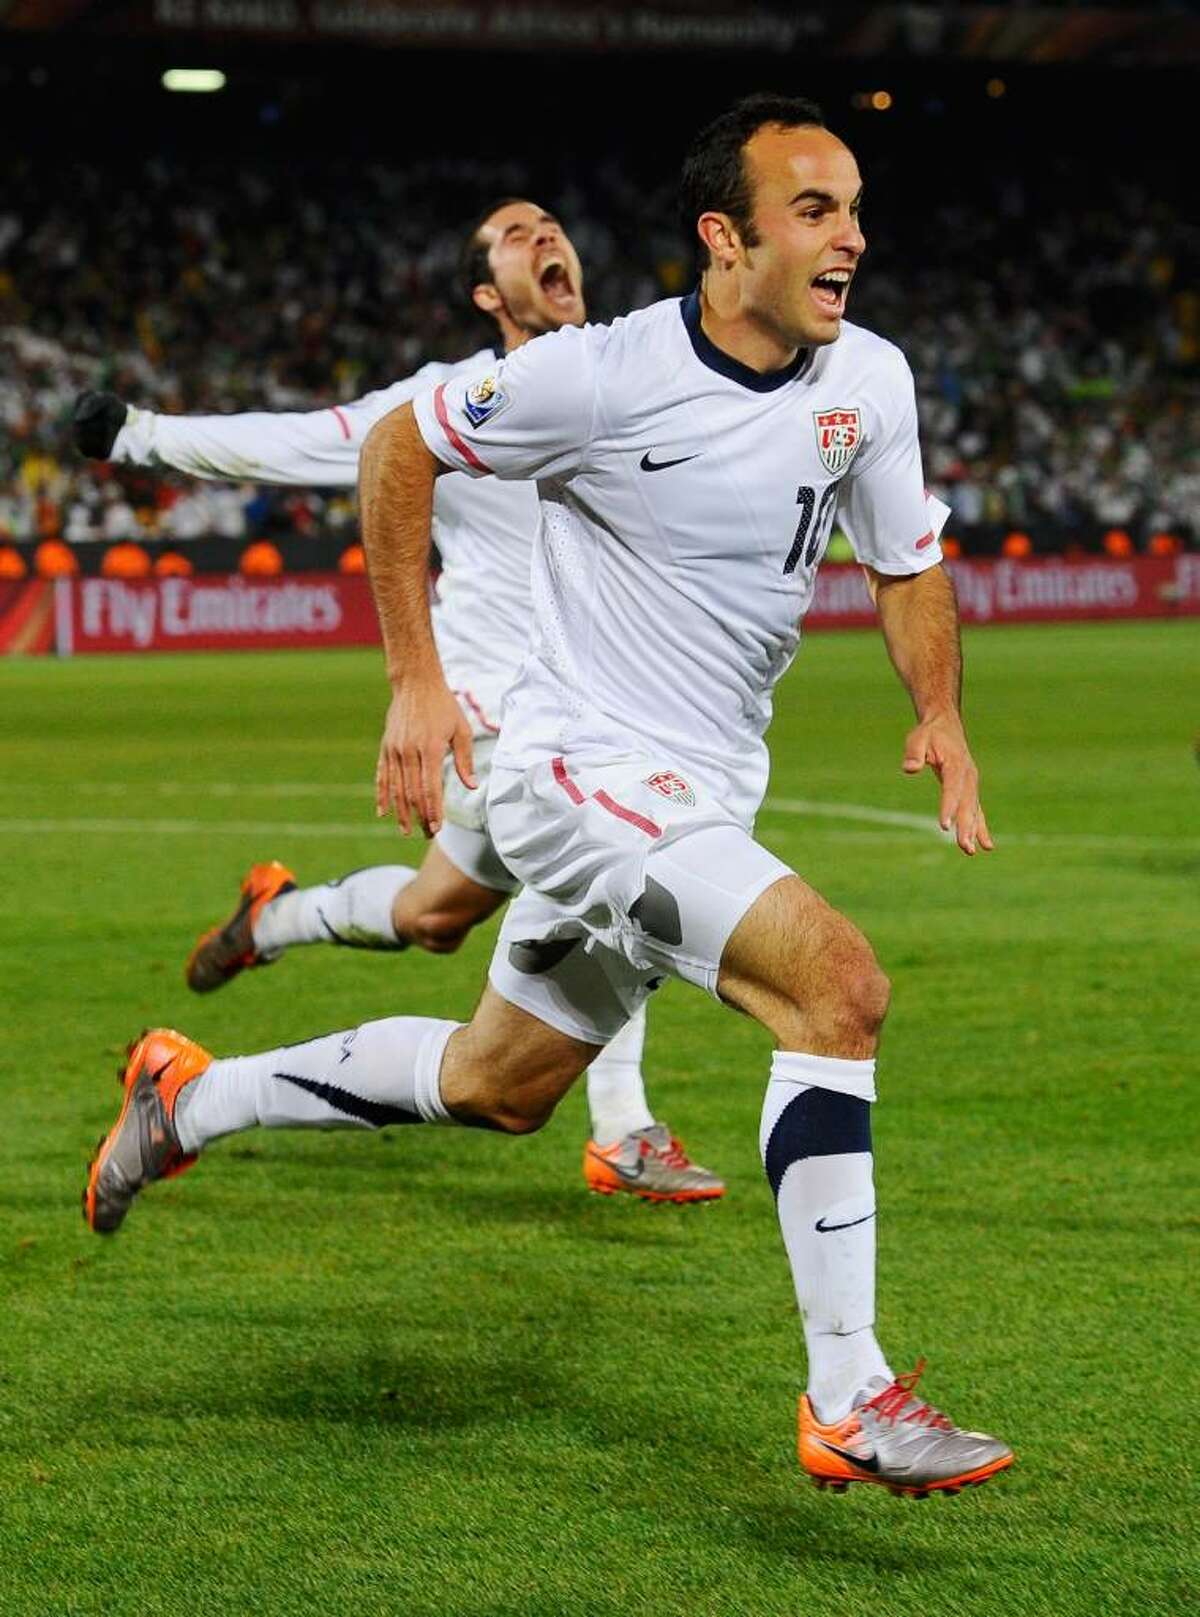 PRETORIA, SOUTH AFRICA - JUNE 23: Landon Donovan and Benny Feilhaber of USA celebrate Donovan's winning goal against Algeria, 1-0, during the 2010 FIFA World Cup South Africa Group C match between USA and Algeria at the Loftus Versfeld Stadium on June 23, 2010 in Tshwane/Pretoria, South Africa. (Photo by Kevork Djansezian/Getty Images) *** Local Caption *** Landon Donovan;Benny Feilhaber